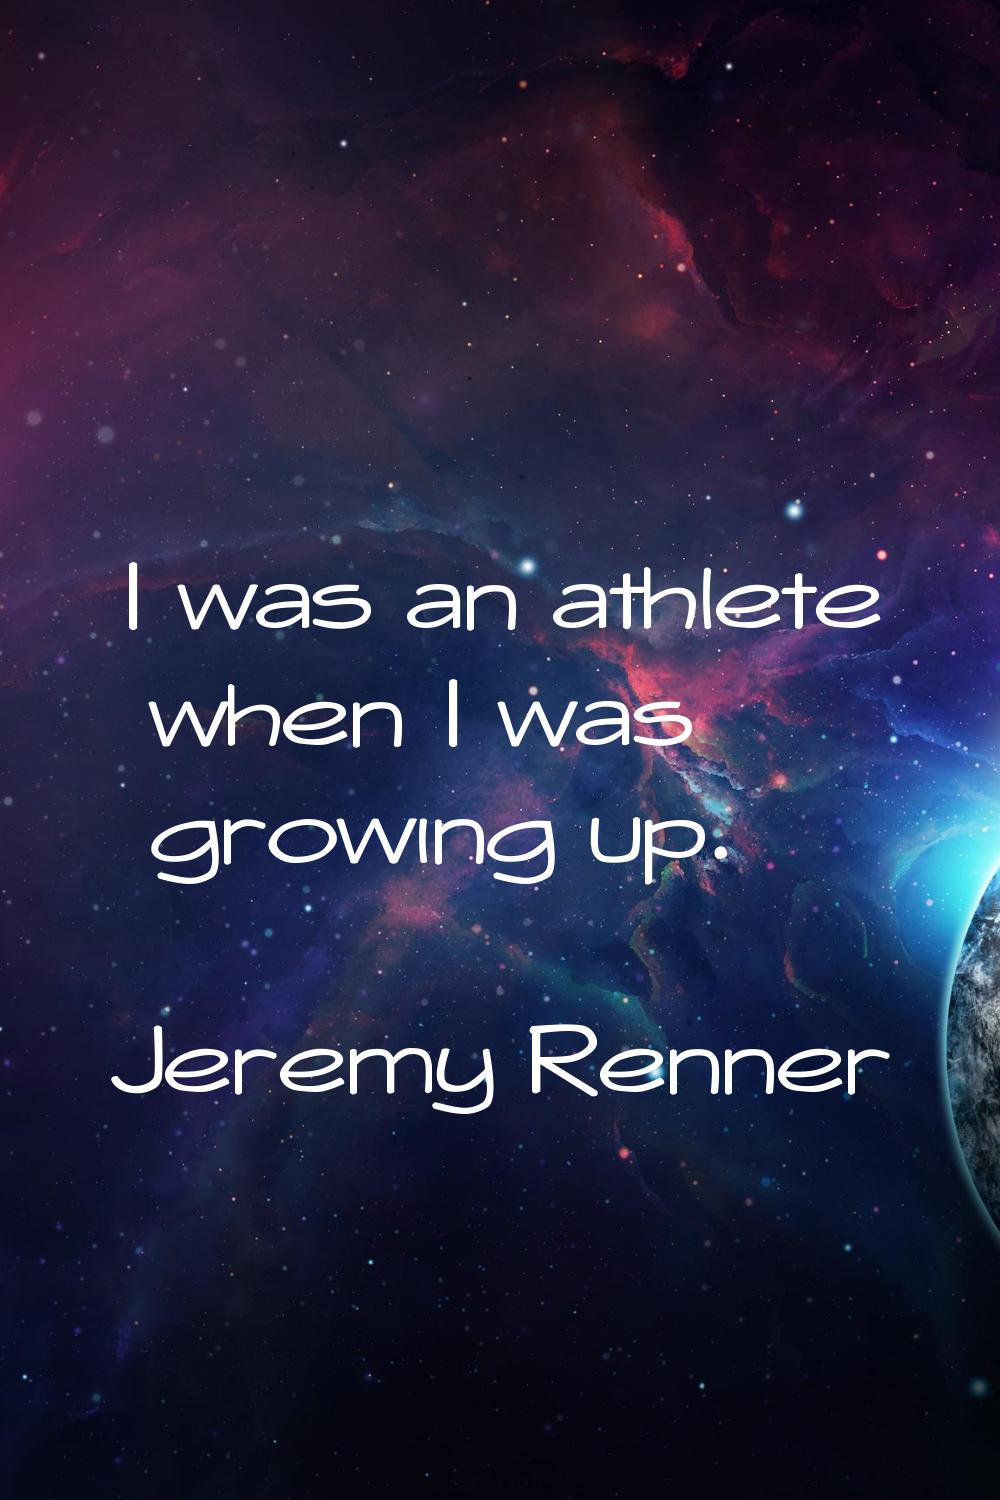 I was an athlete when I was growing up.